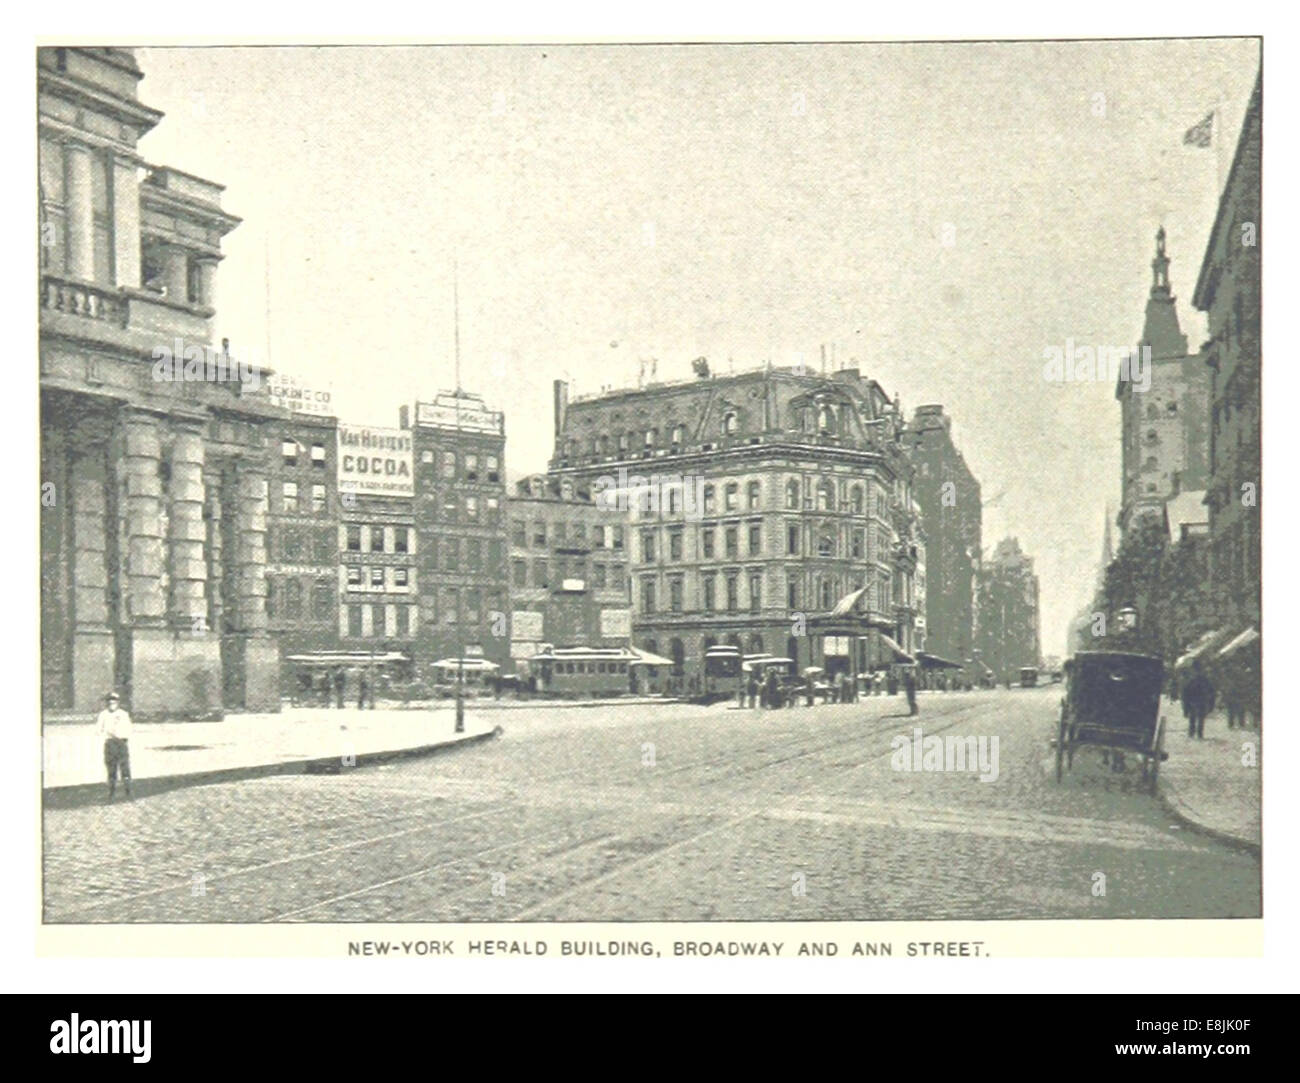 (King1893NYC) pg630 NEW-YORK HERALD BUILDING, BROADWAY AND ANN STREET Stock Photo